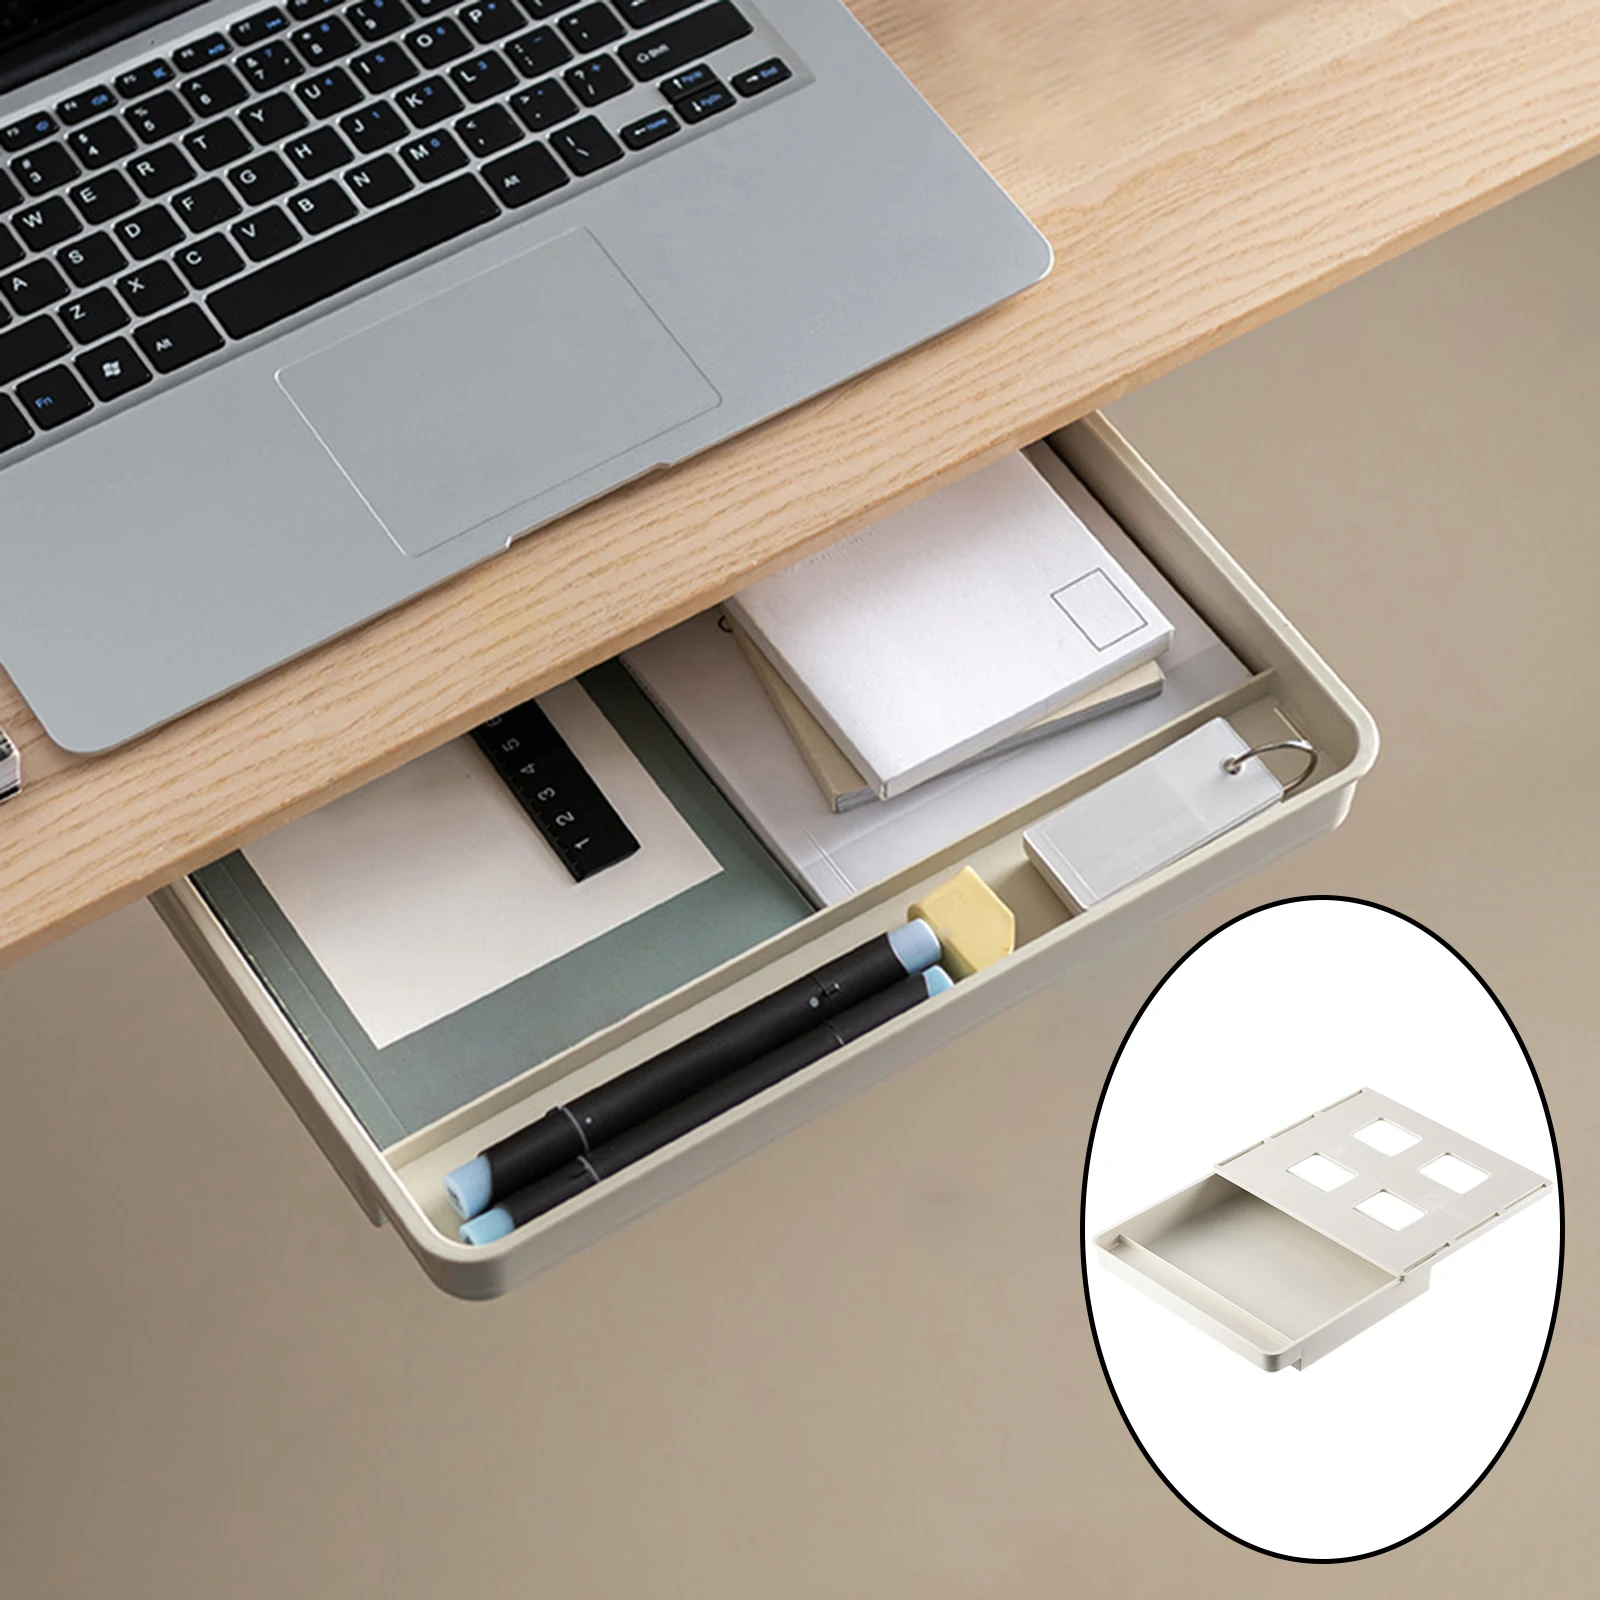 Under Desk Drawer Adhesive Large Capacity for School Workspace Pen Holder Storage Tray Organizer Slide Out